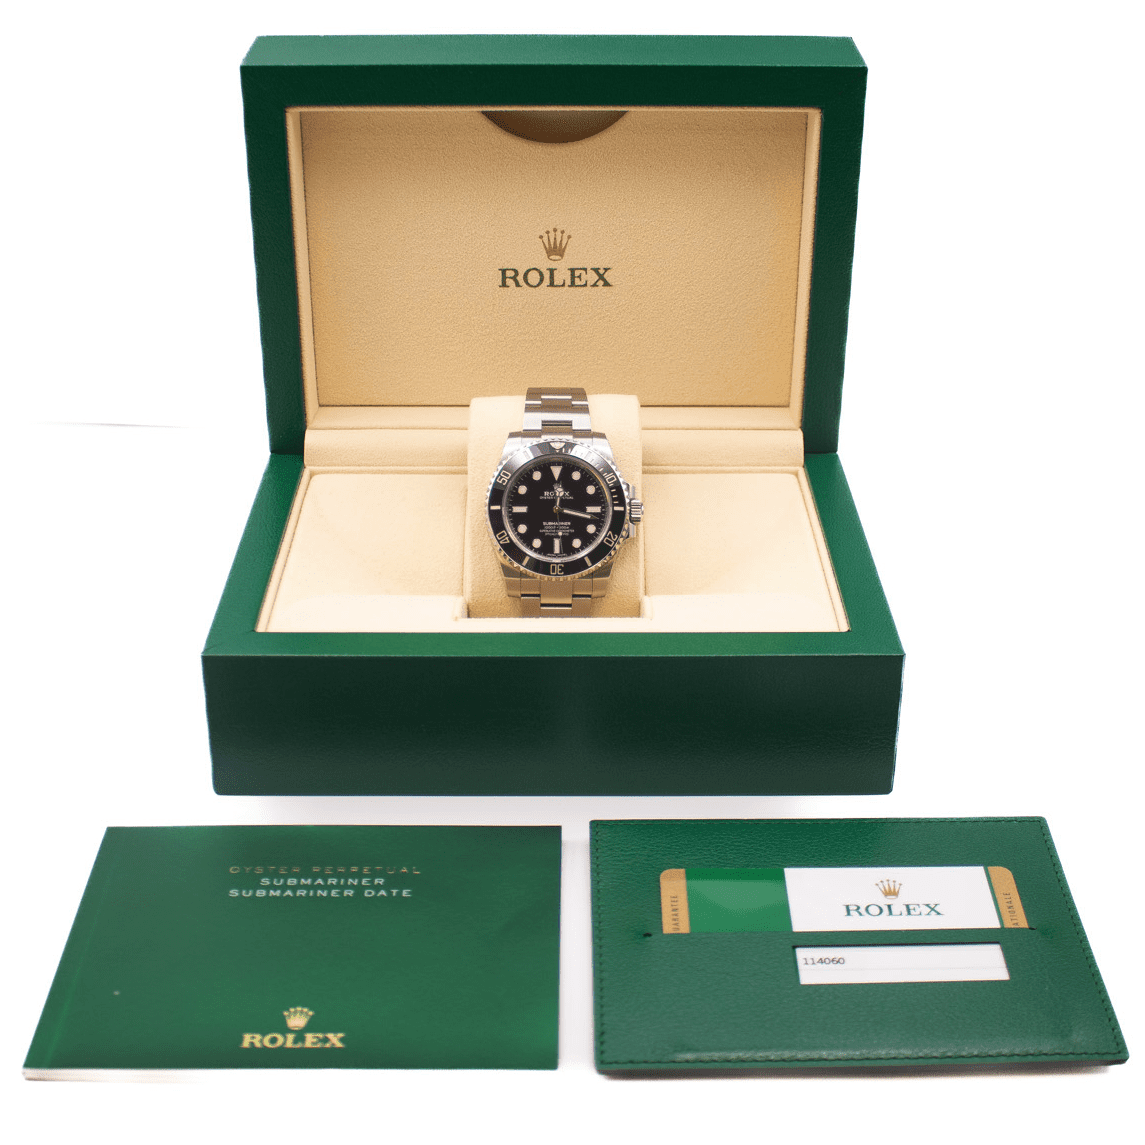 Rolex Submariner in box with certificates